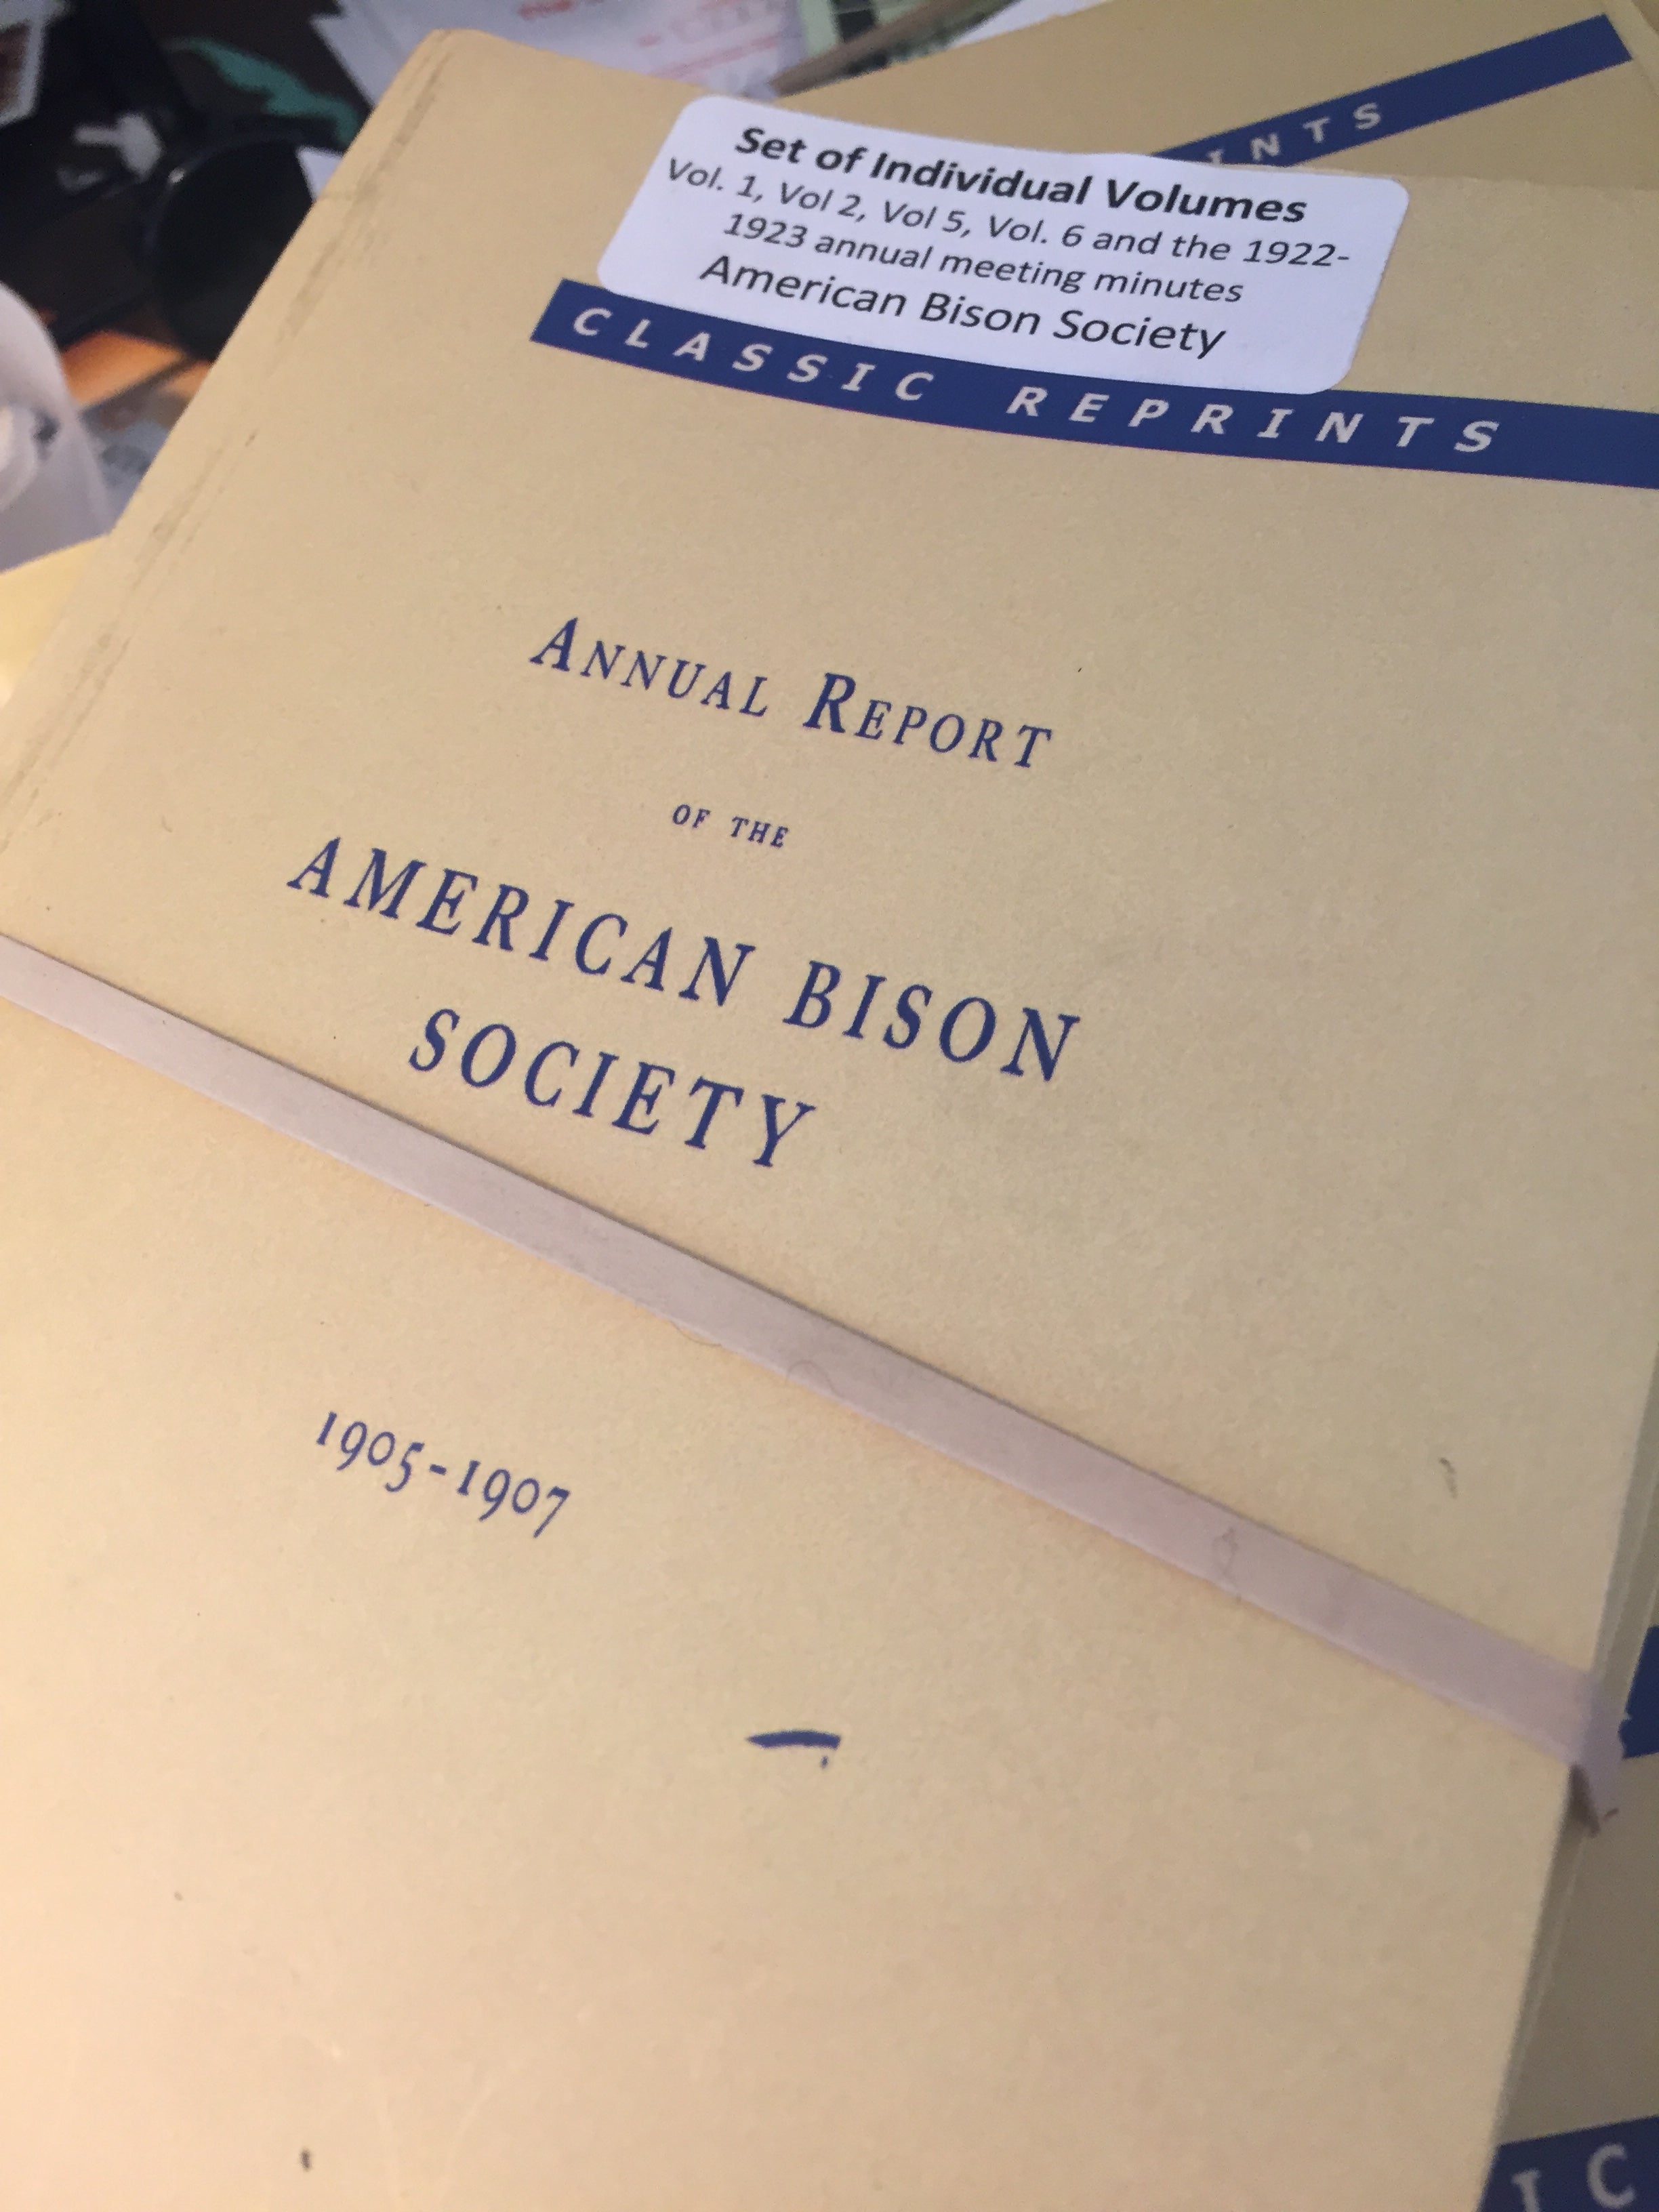 BOOKS - Annual Report of the American Bison Society - sets of individual volumes 1, 2, 5 and 1922-23